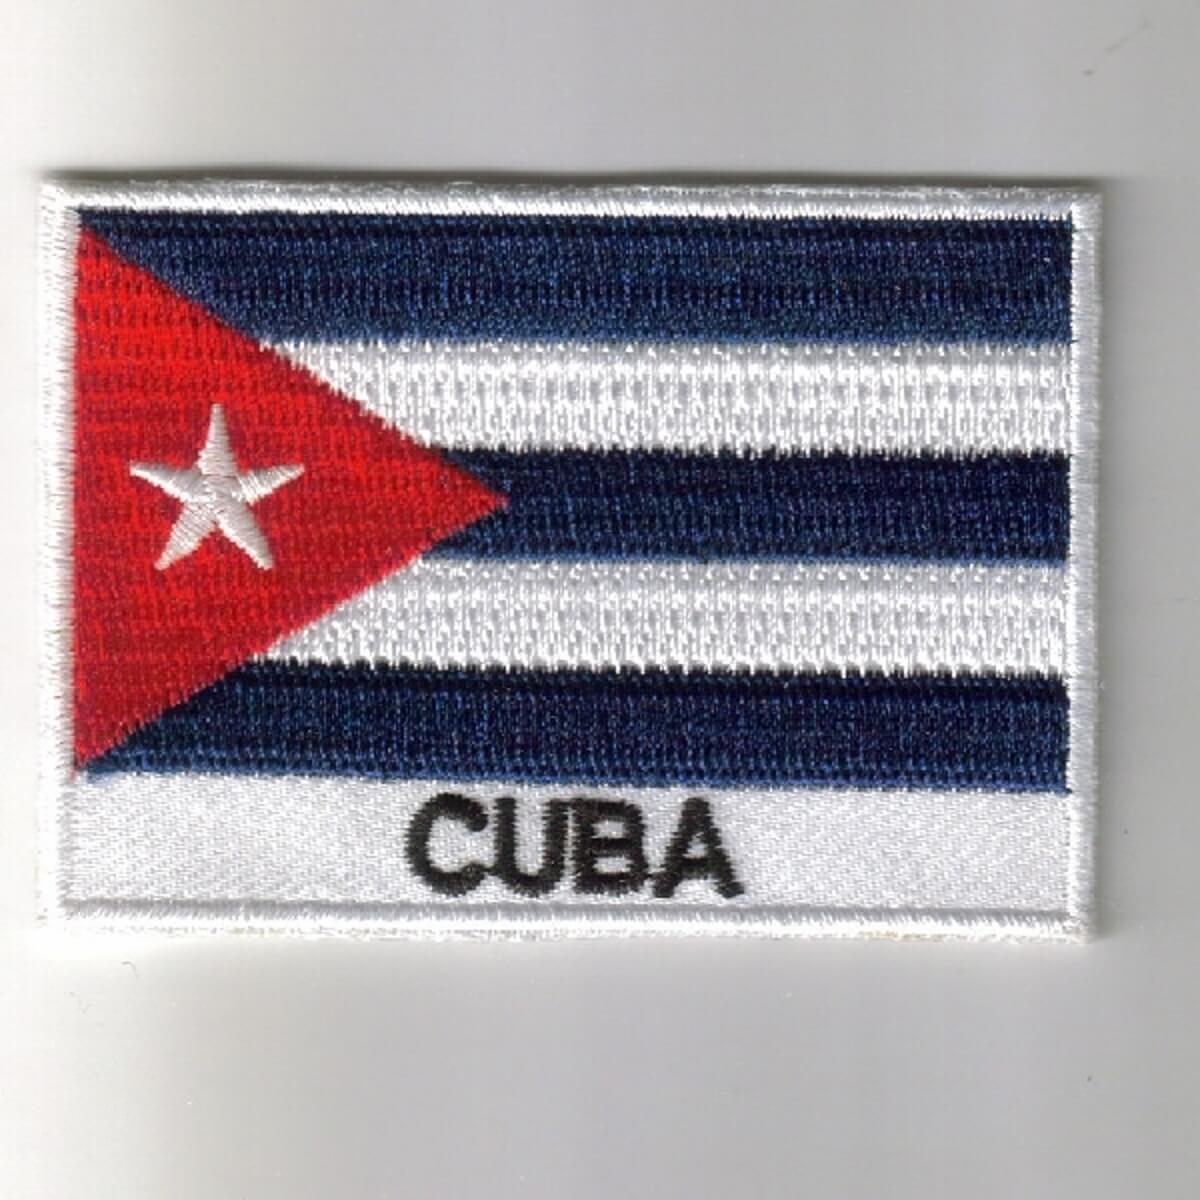 Cuba embroidered patches - country flag Cuba patches / iron on badges